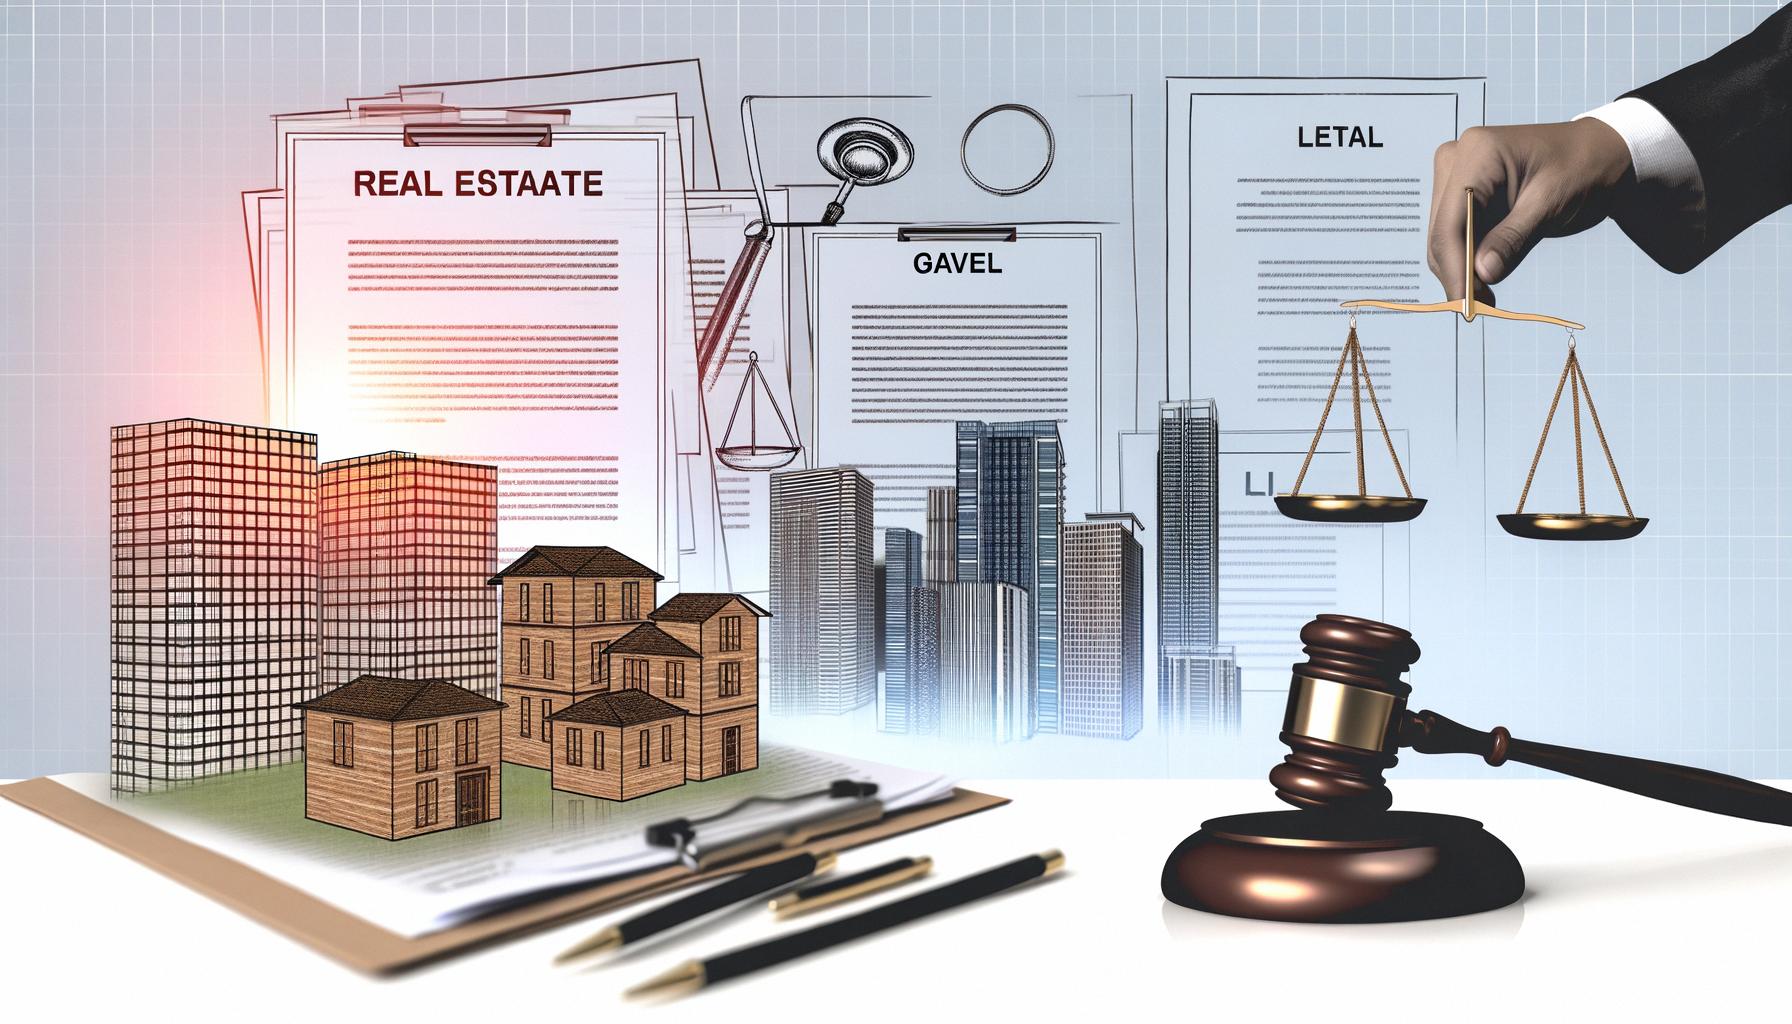 Heightened scrutiny on property management and regulatory policies across various jurisdictions.